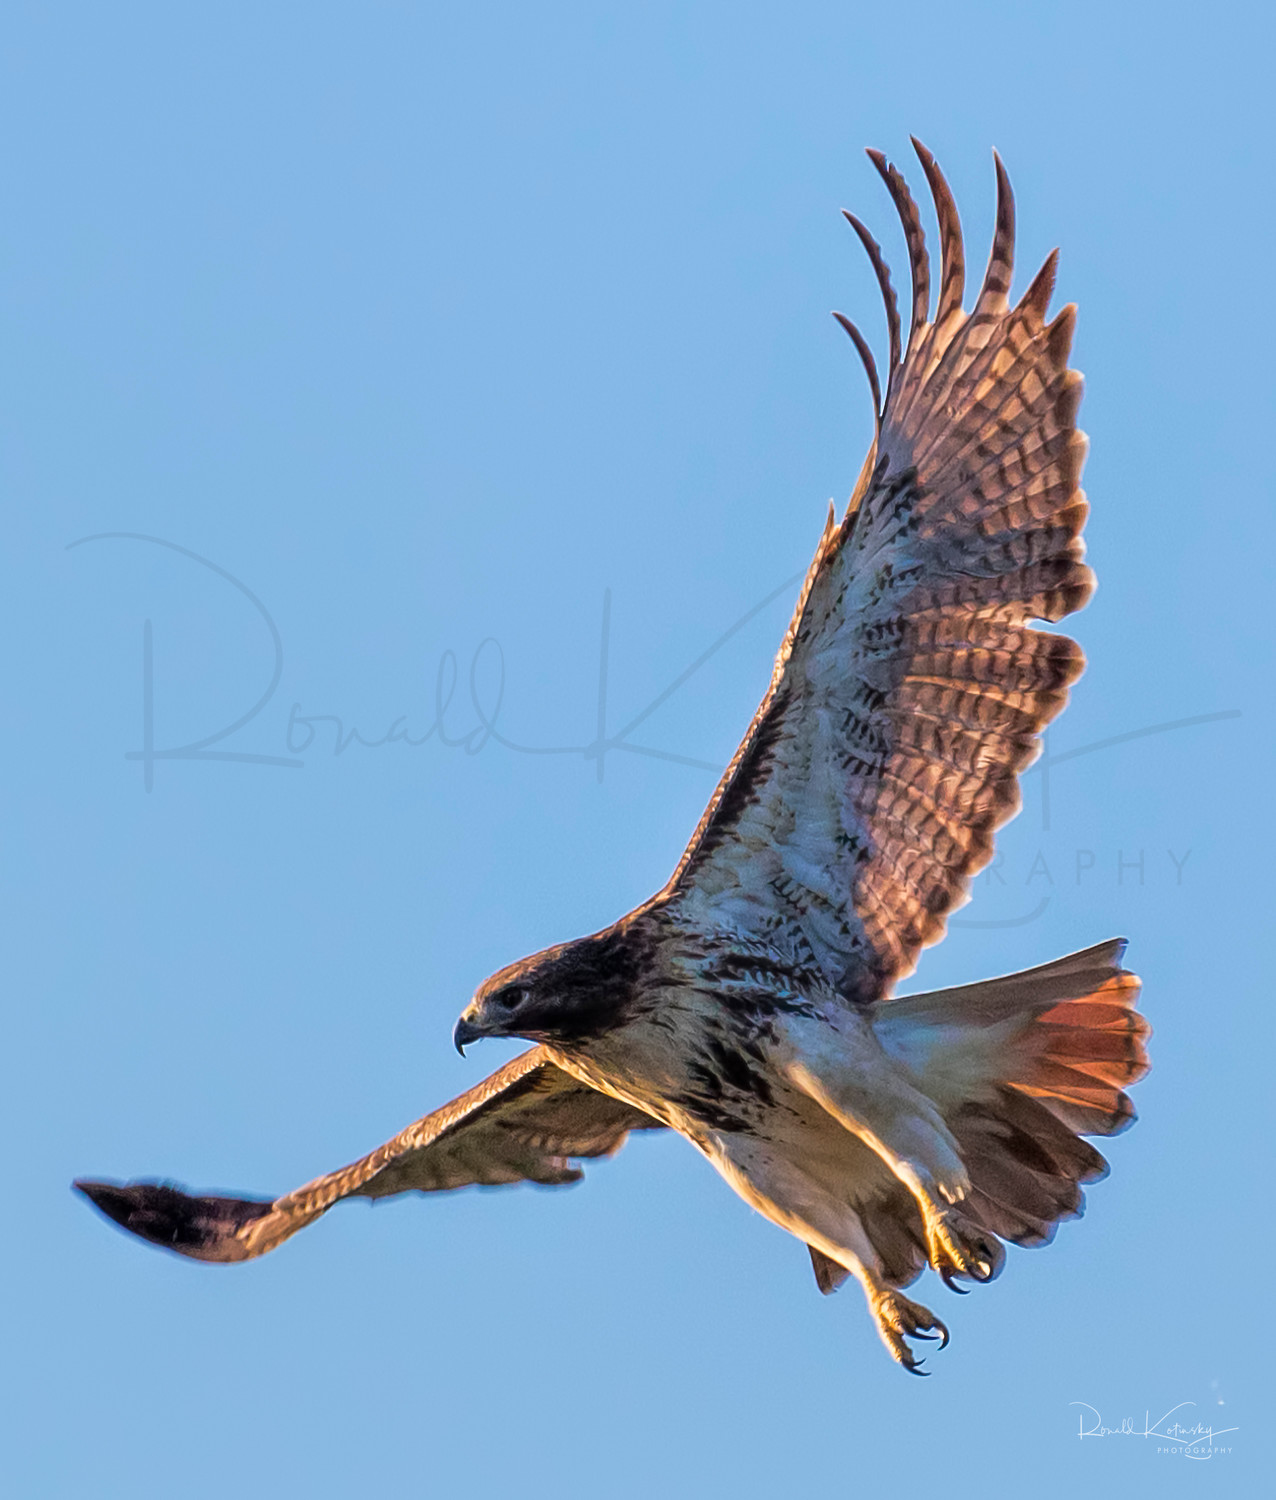 Sunrise of the Red Tailed Hawk